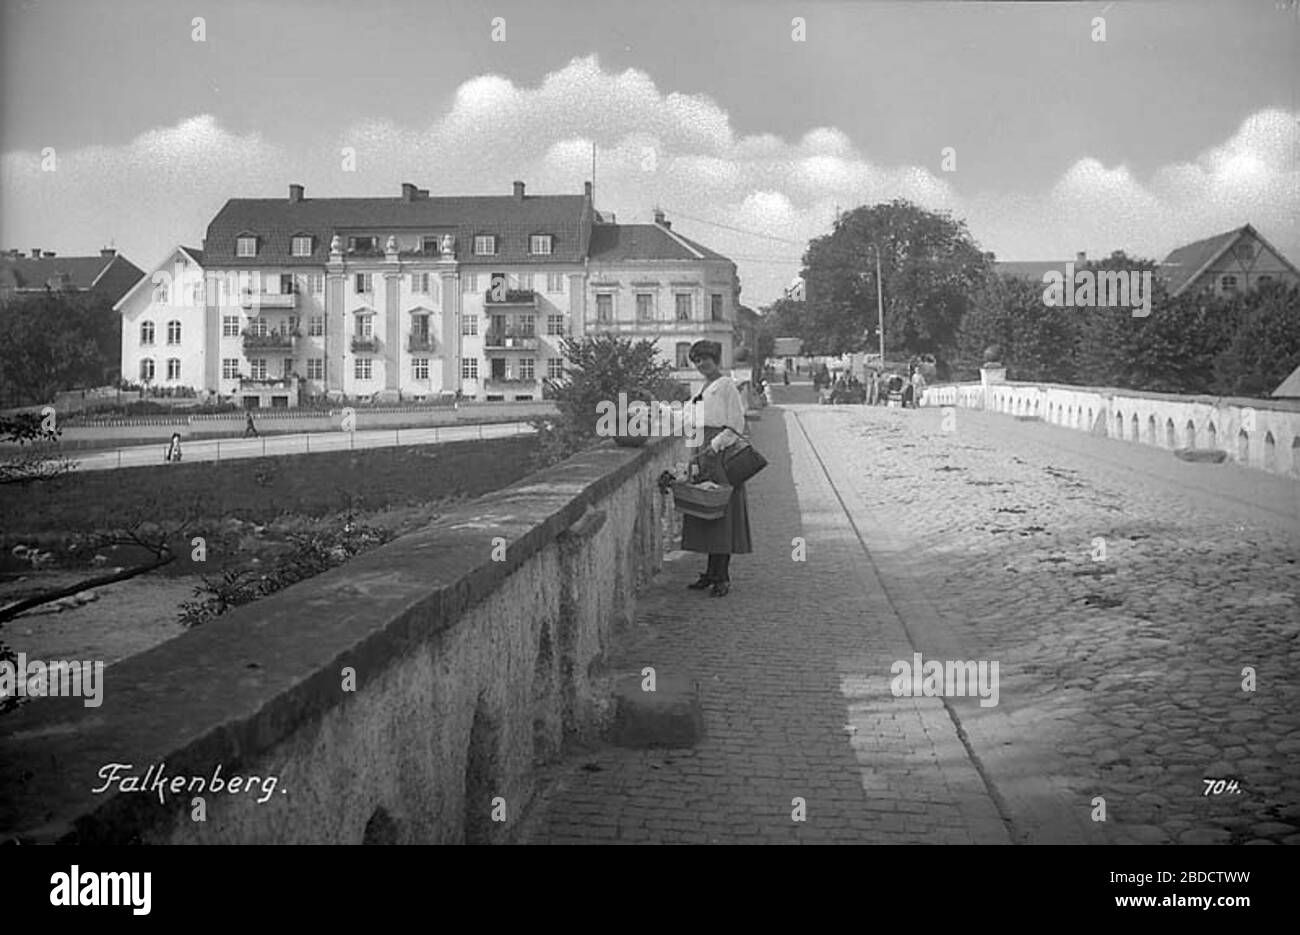 'Falkenberg; Tullbron.; between 1 January 1930 and 31 December 1959 date QS:P571,+1950-00-00T00:00:00Z/7,P1319,+1930-01-01T00:00:00Z/11,P1326,+1959-12-31T00:00:00Z/11; Kulturmiljöbild, Riksantikvarieämbetet      This file was provided to Wikimedia Commons by the Swedish National Heritage Board as part of the cooperation project Connected Open Heritage with Wikimedia Sverige.        This file was made available by Riksantikvarieämbetet as part of the Connected Open Heritage project. The project is led by Wikimedia Sverige in cooperation with UNESCO, Wikimedia Italia and Cultural Heritage withou Stock Photo